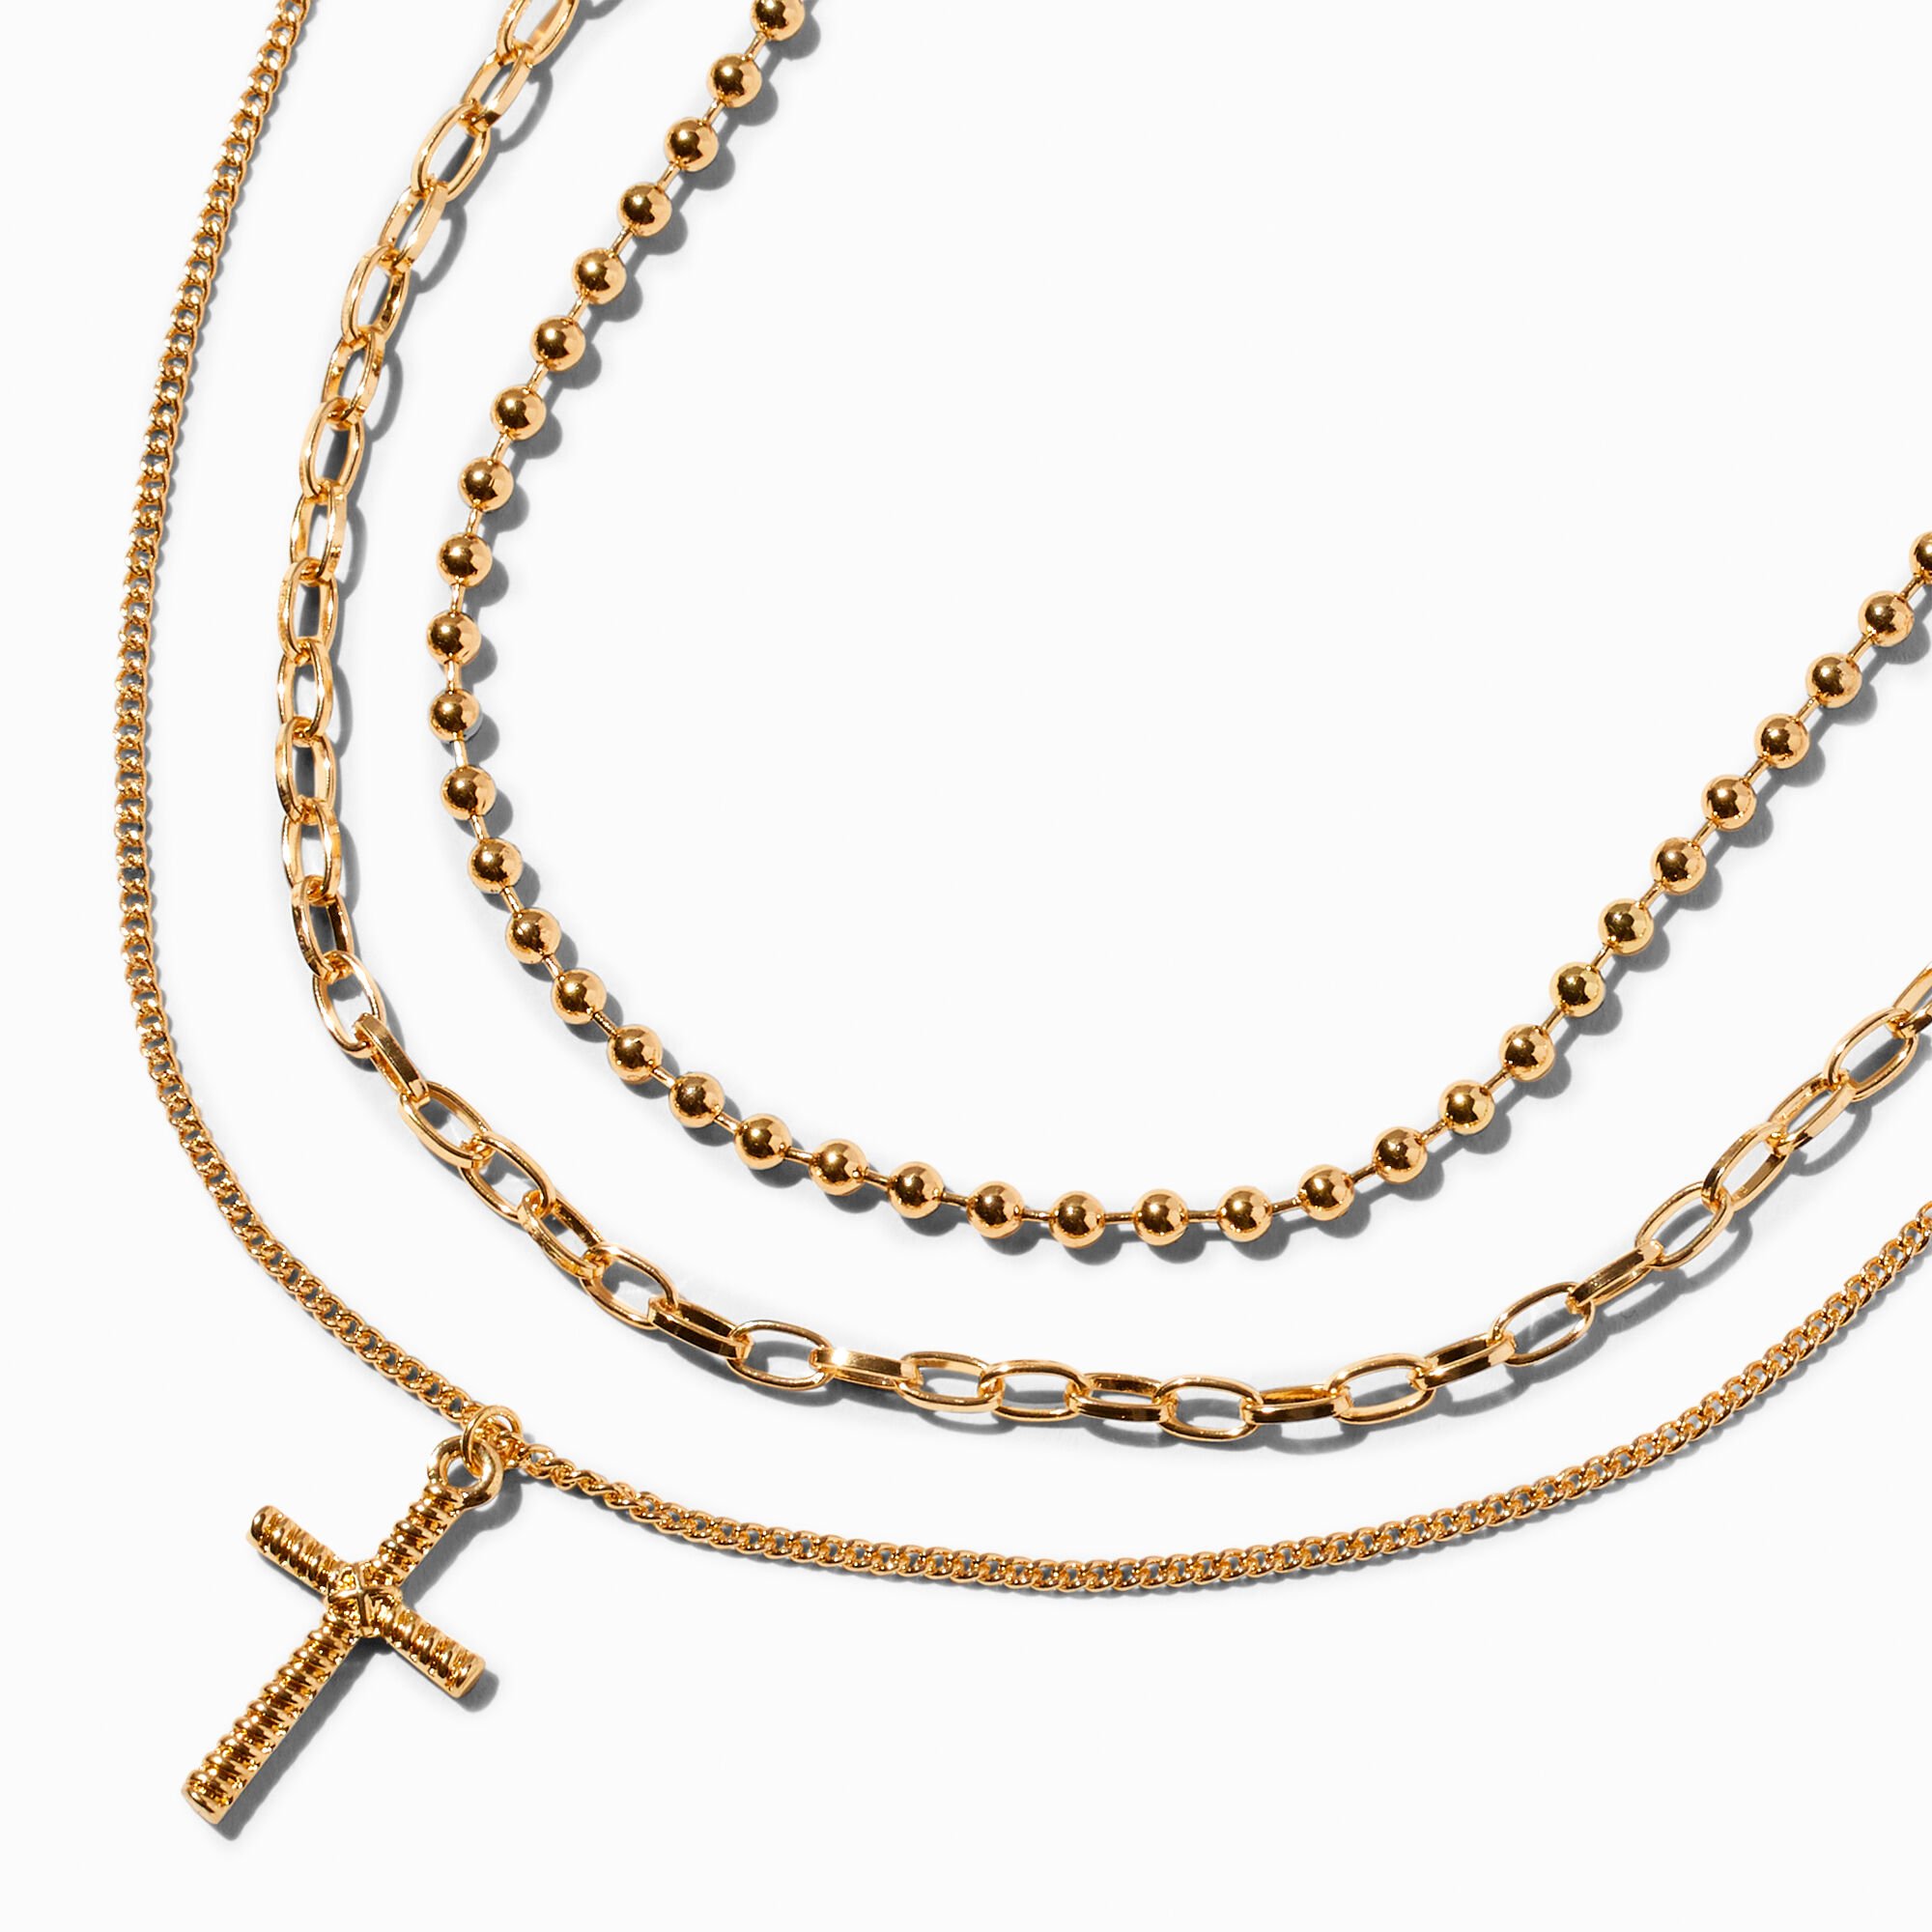 View Claires Tone Cross Pendant Chain Necklaces 3 Pack Gold information